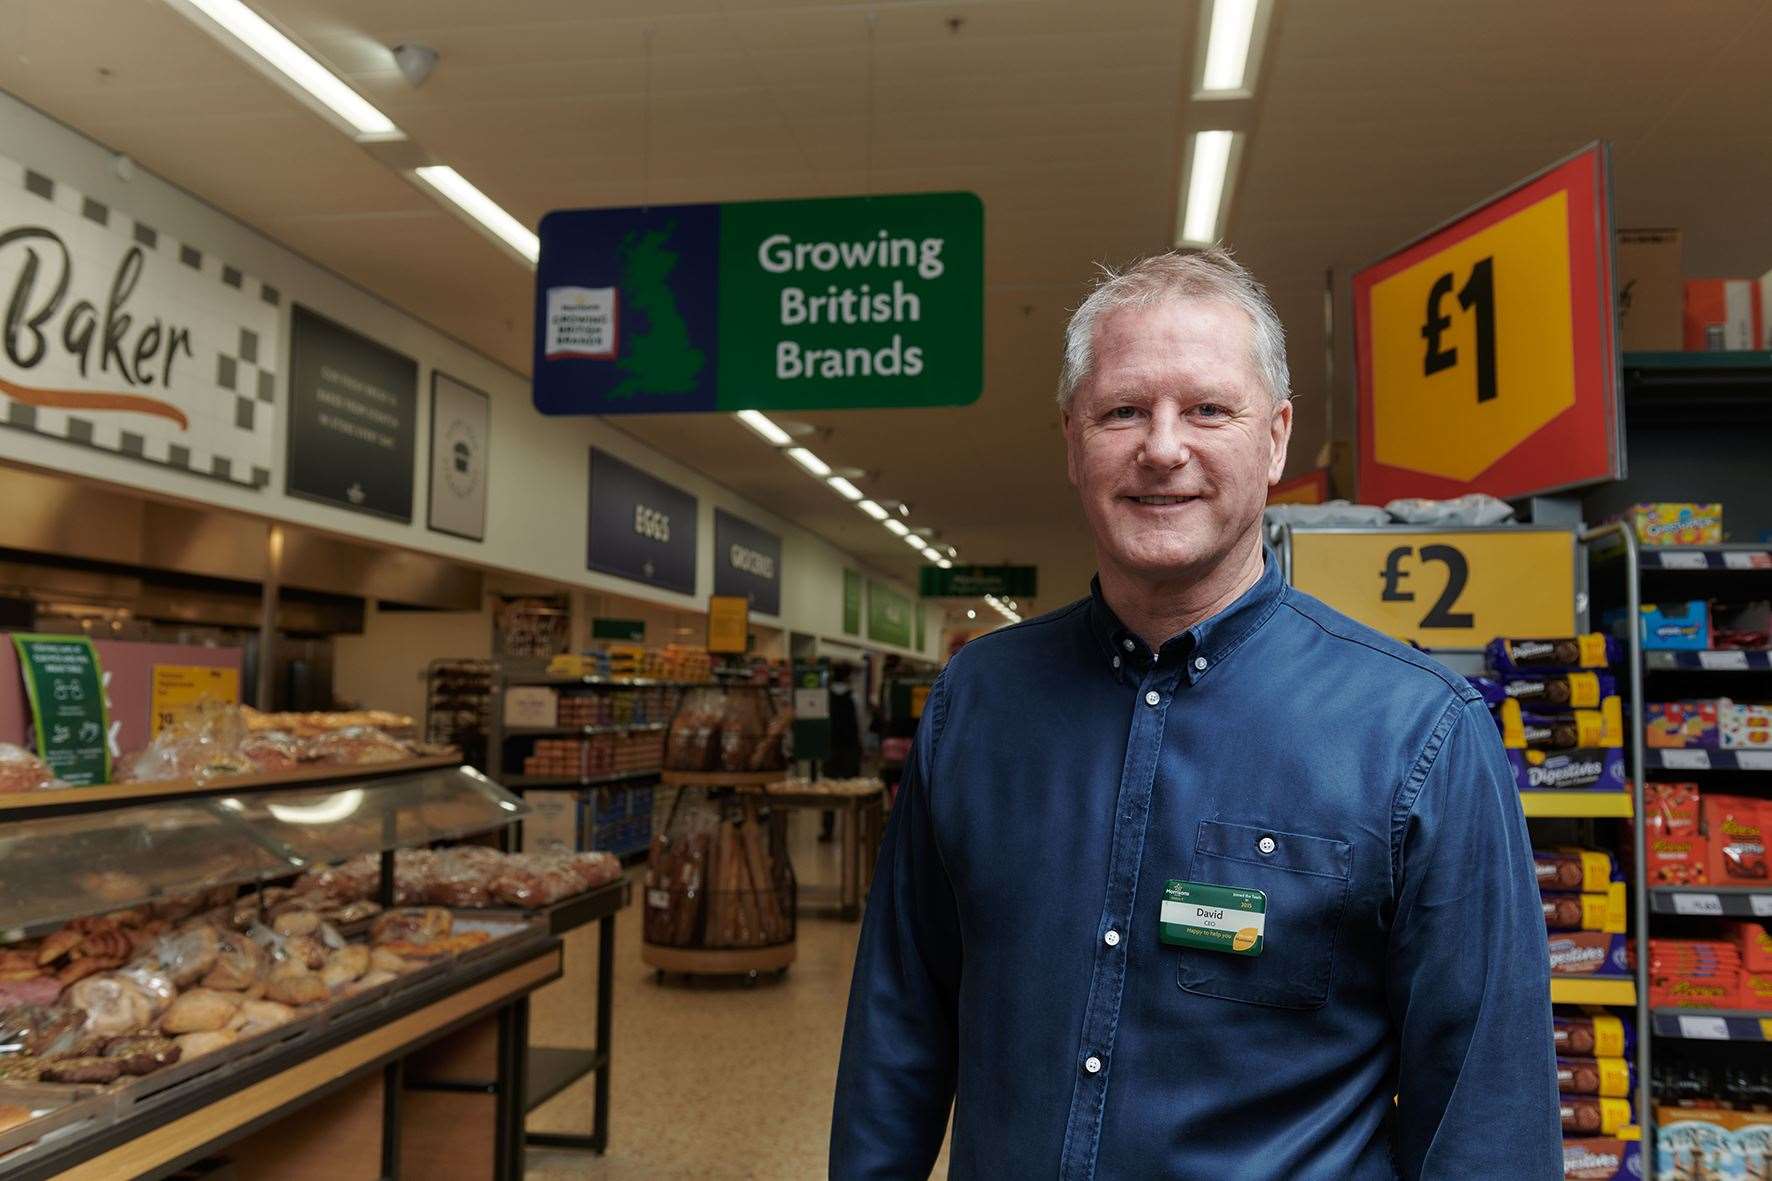 Morrisons is offering British entrepreneurs a fast-tracked route to a national market through a programme called Growing British Brands